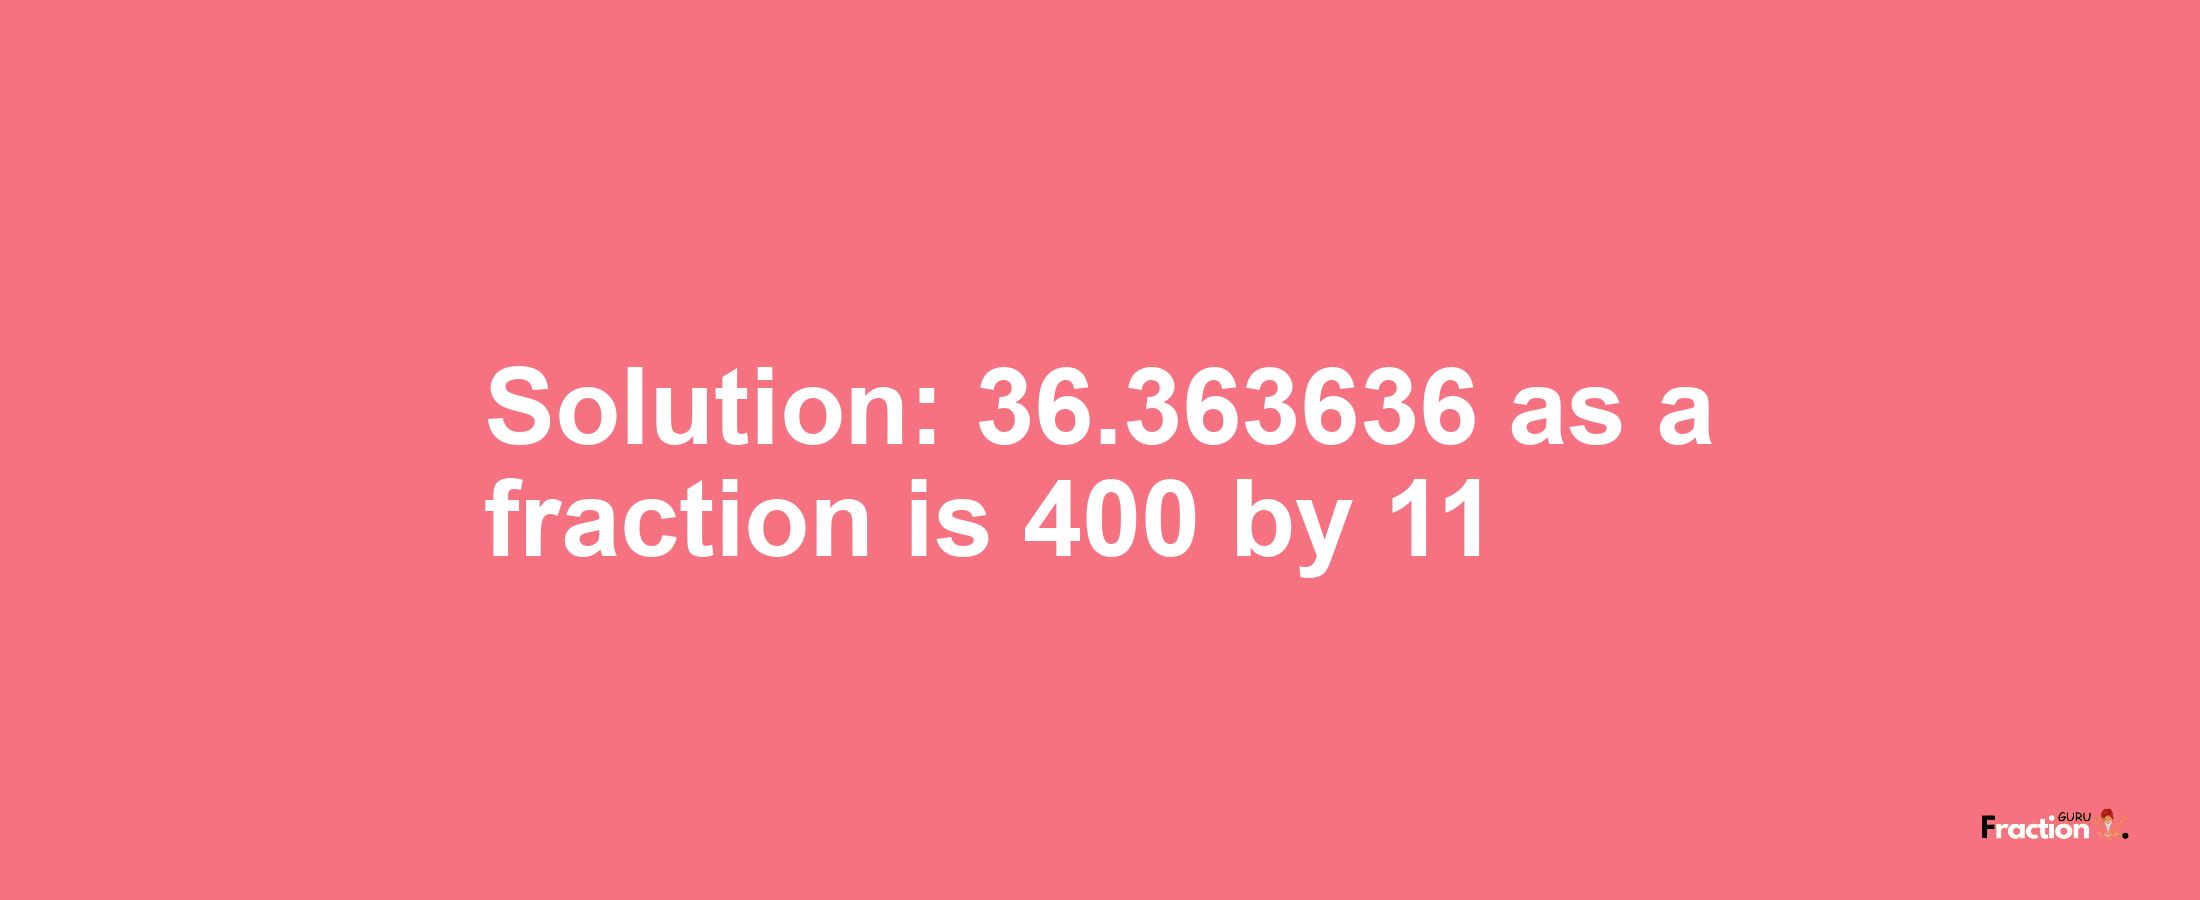 Solution:36.363636 as a fraction is 400/11